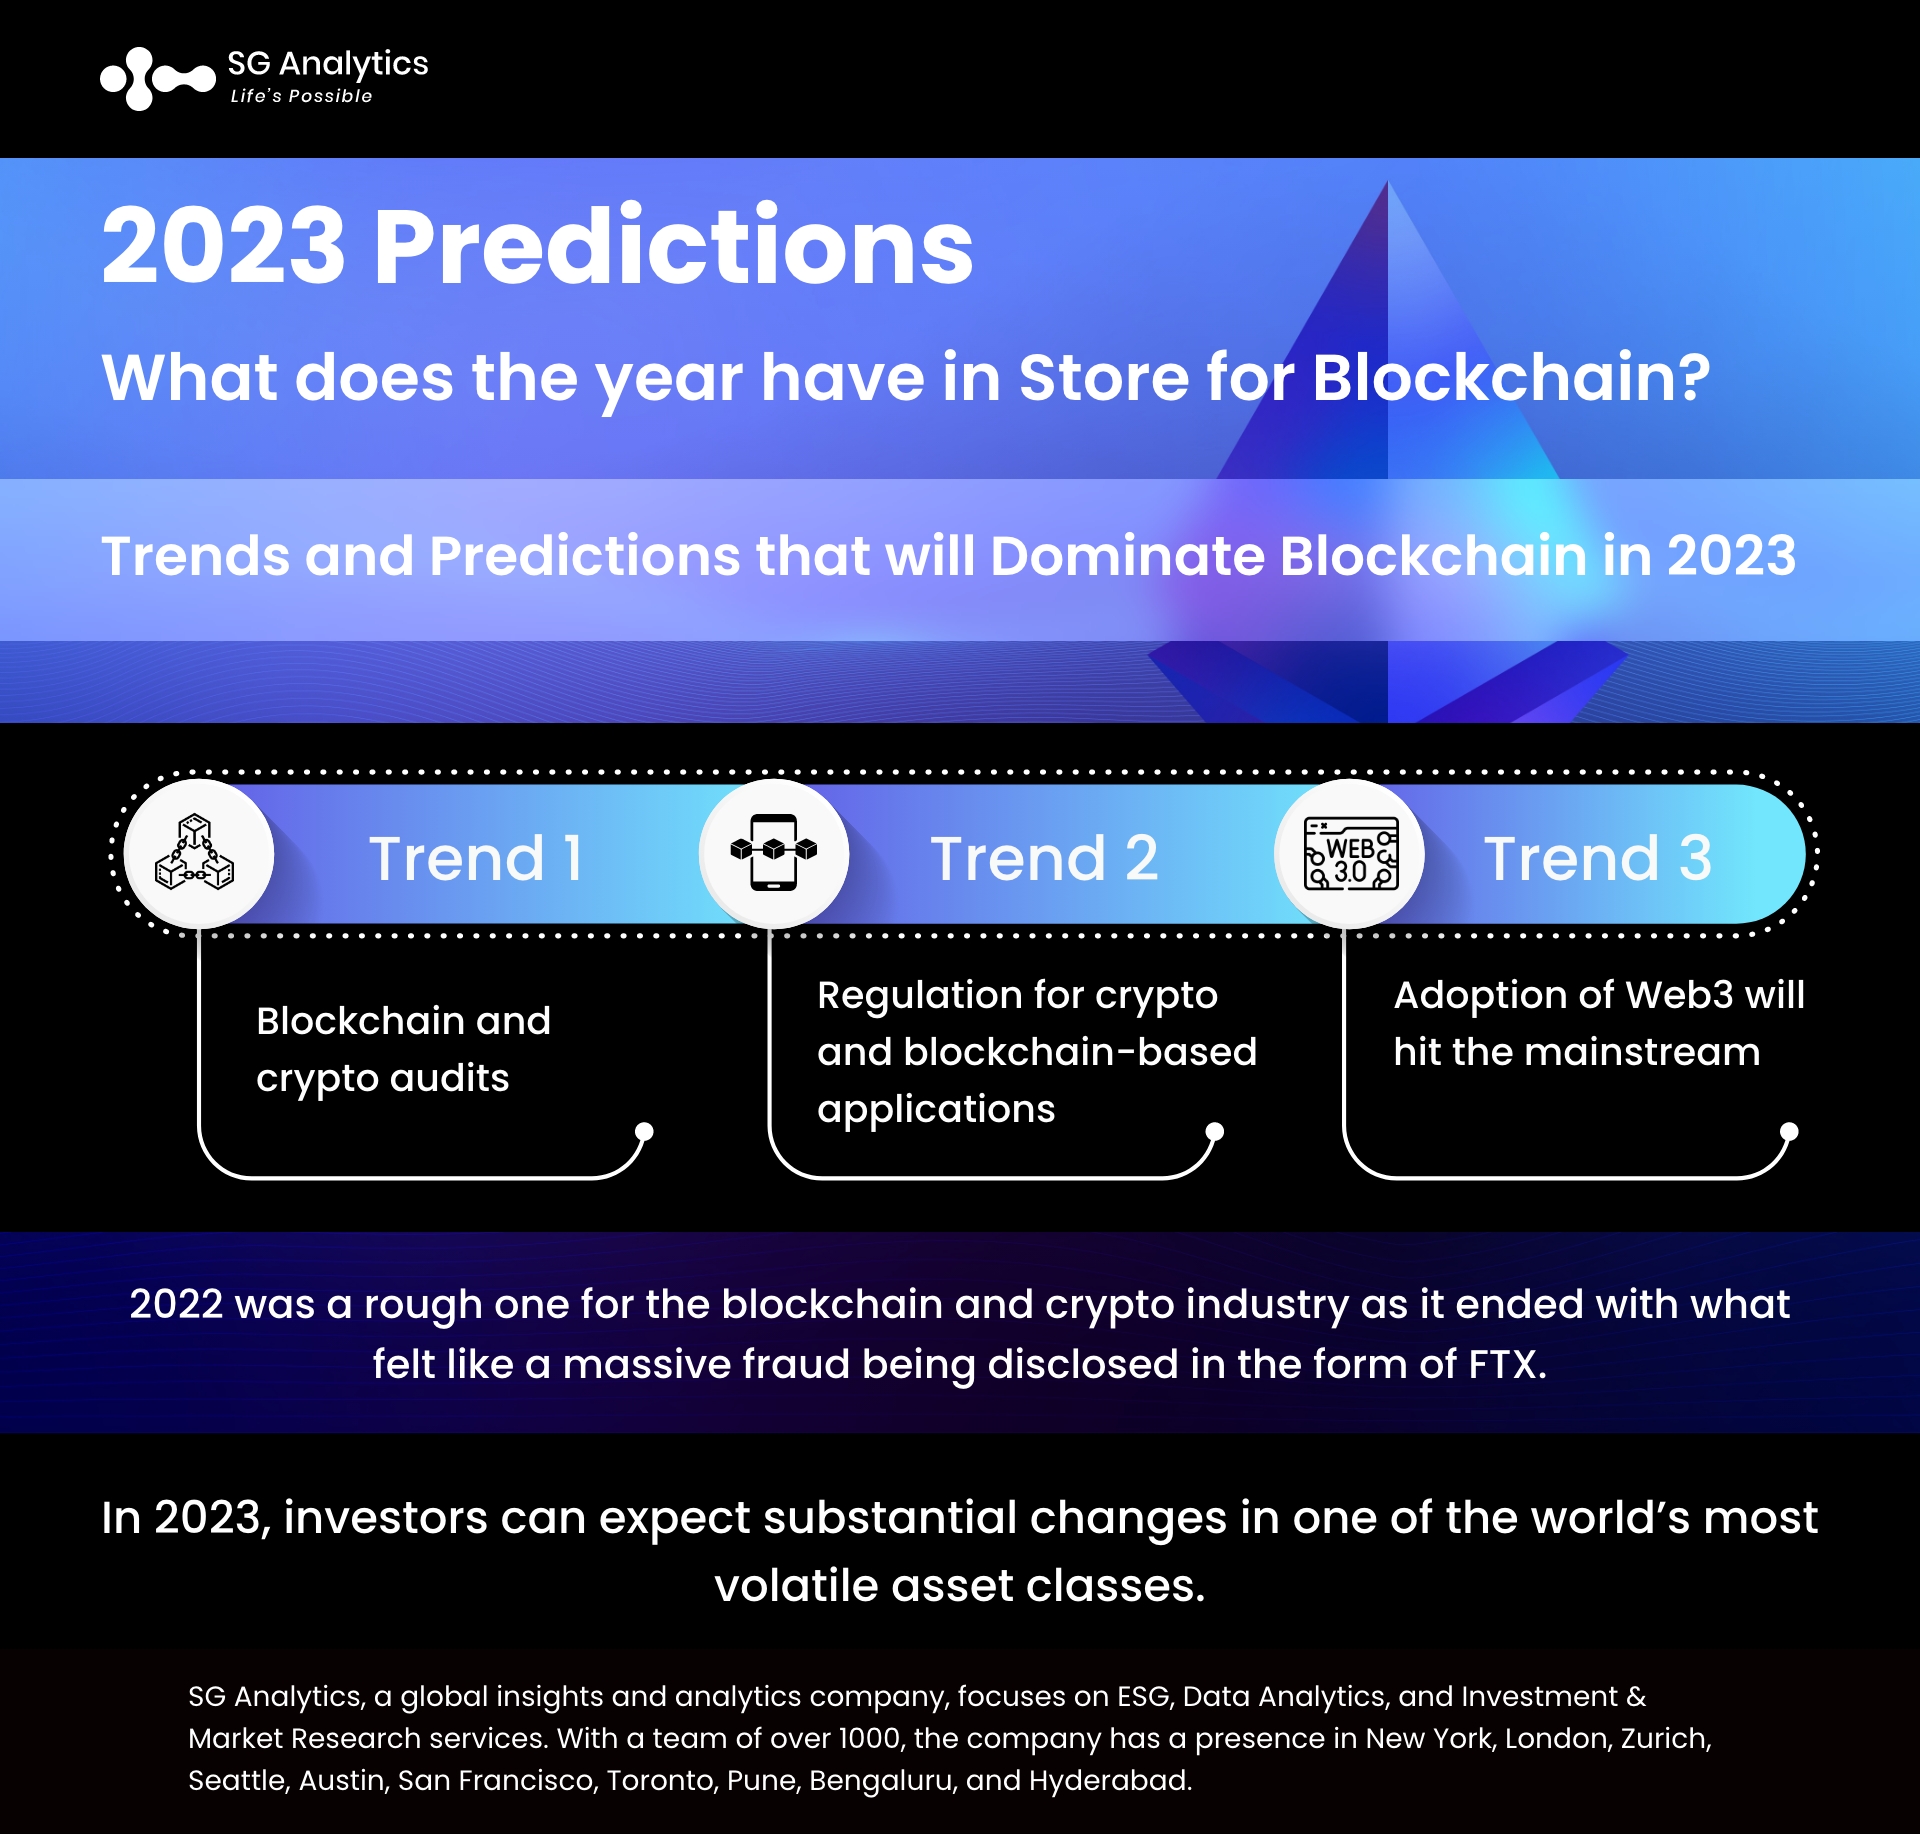 2023 Predictions - What does the year have in Store for Blockchain